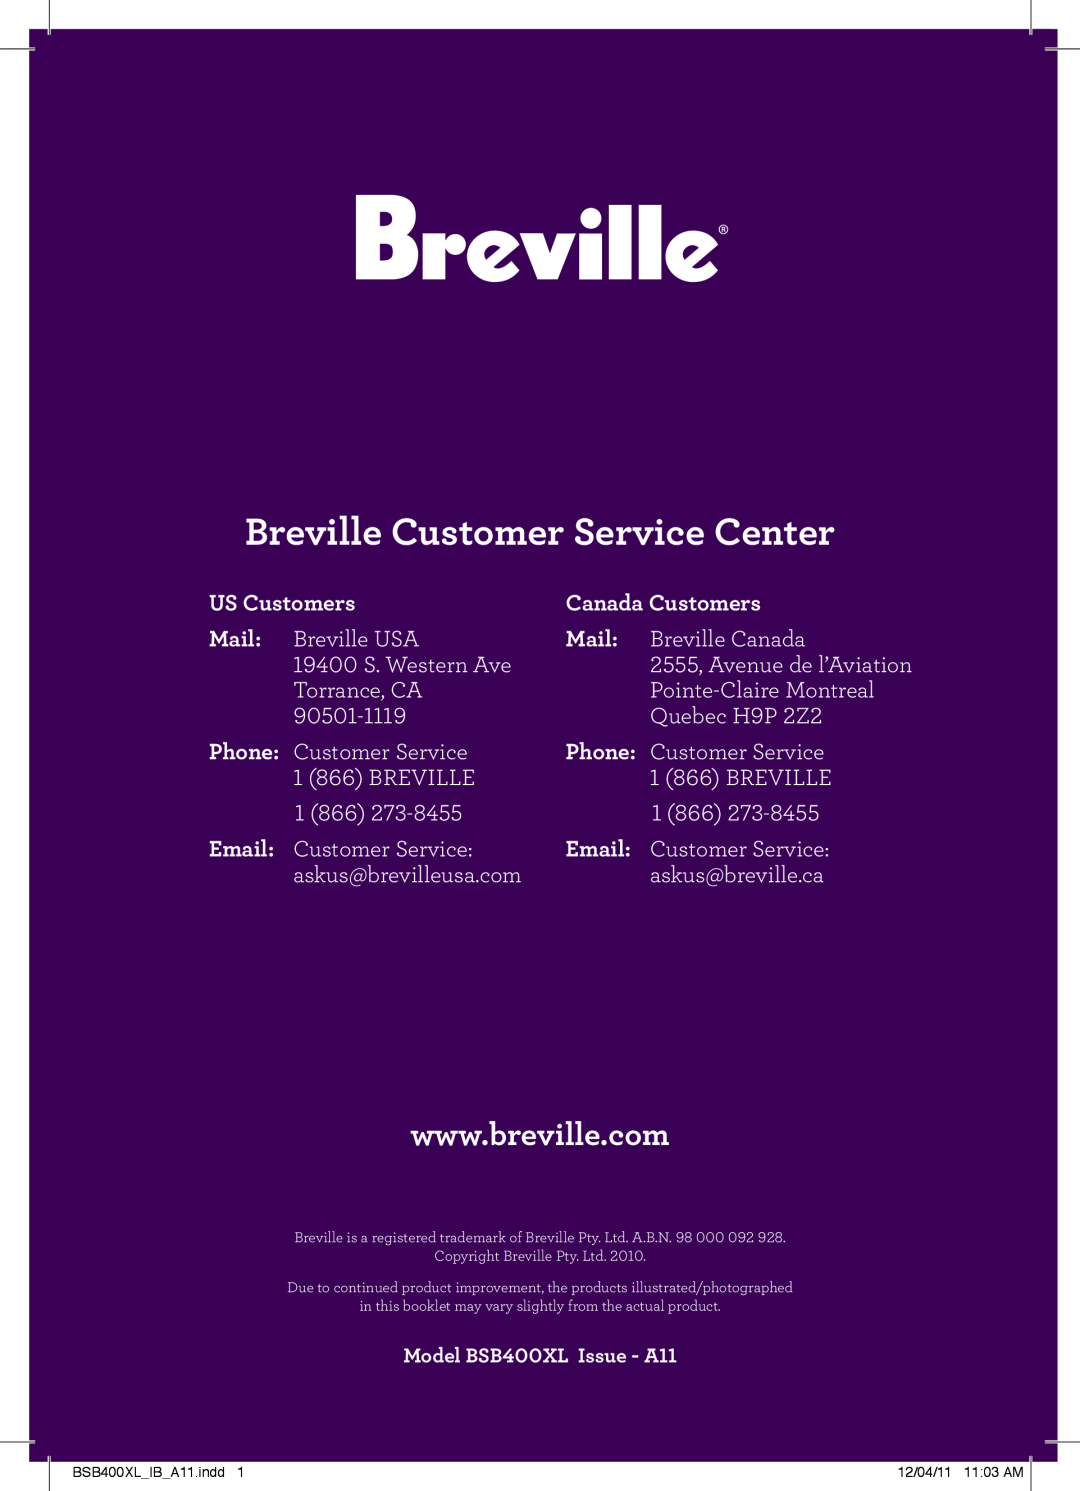 Breville BSB400XL manual US Customers, Canada Customers, Mail, Email, Breville Customer Service Center 